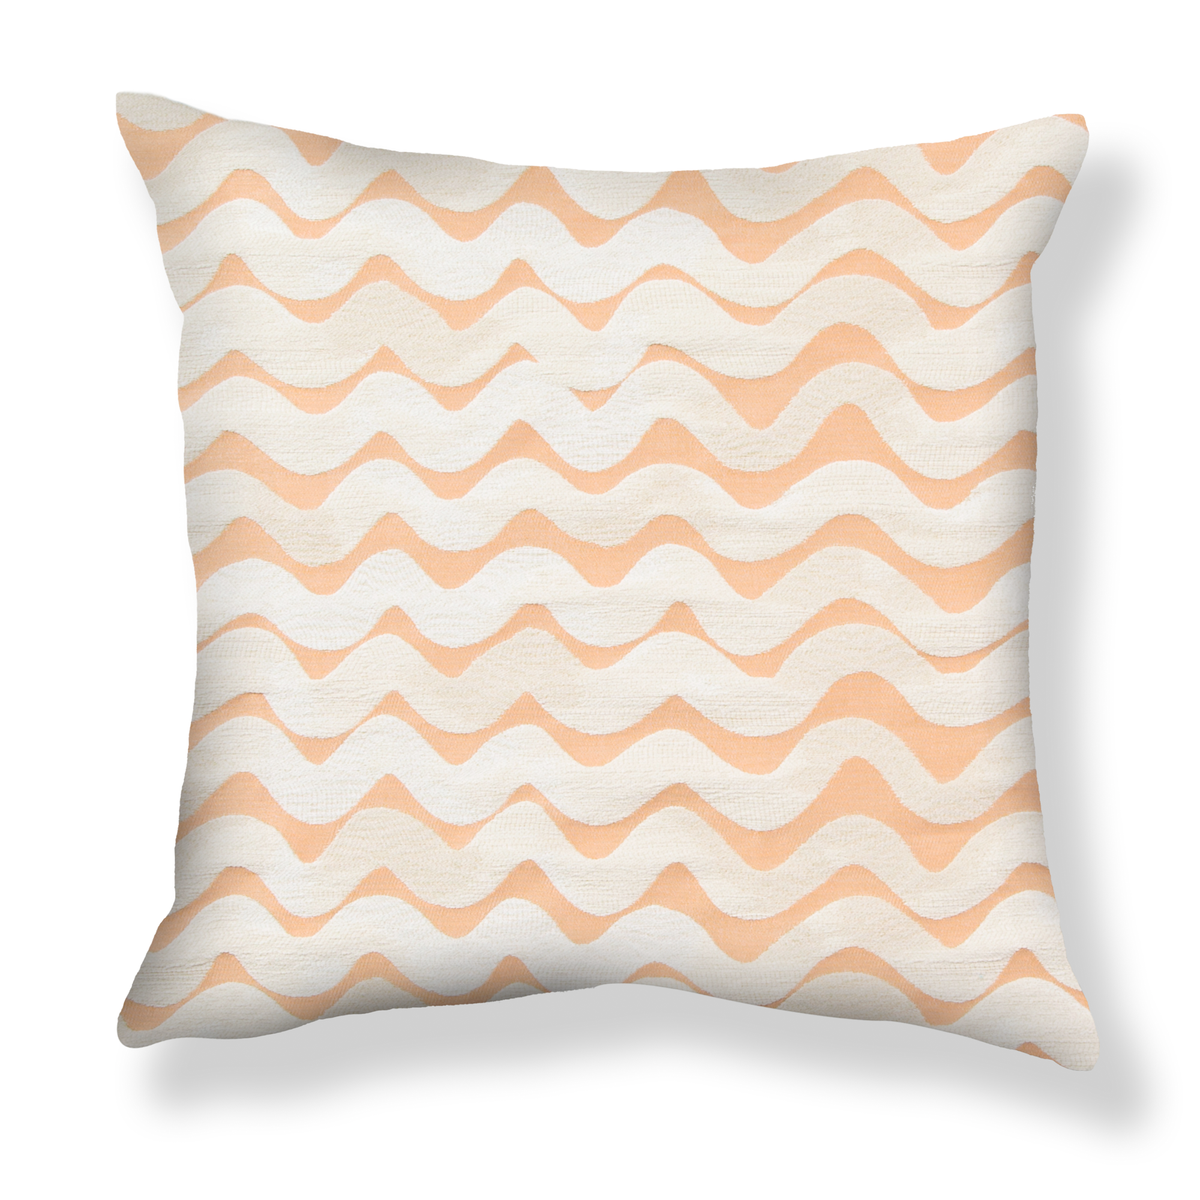 Tidal Wave Pillow in Peach